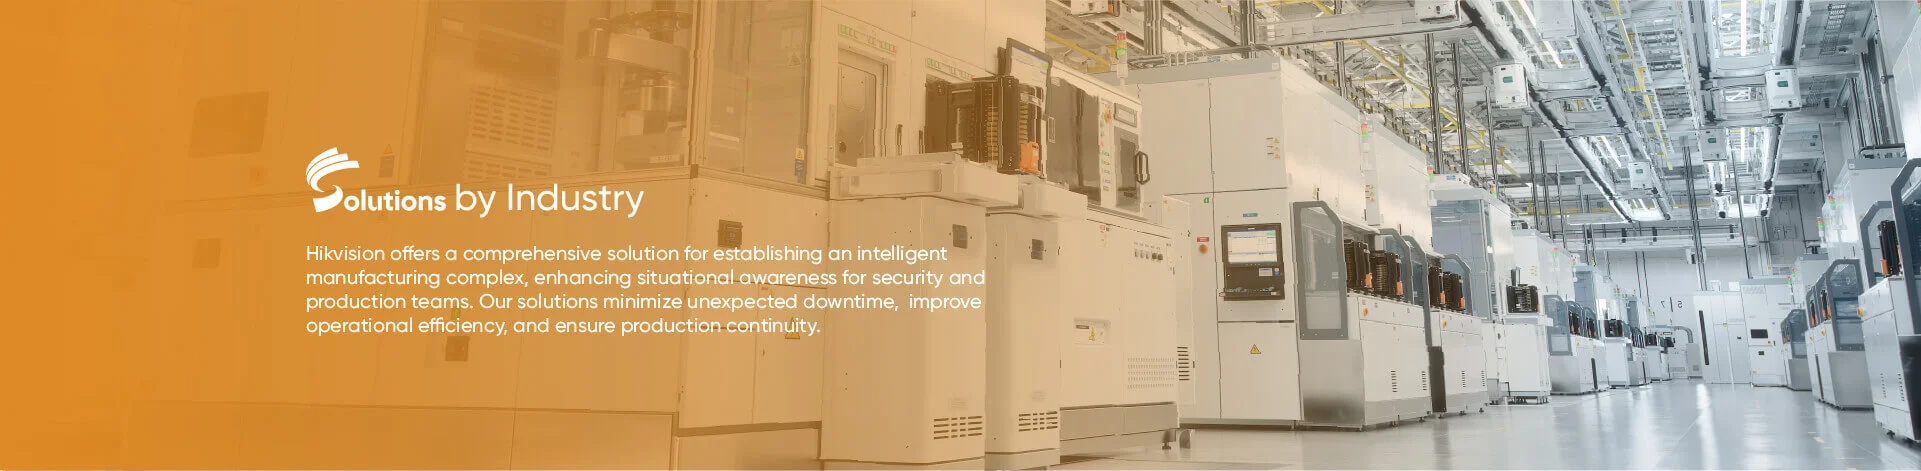 Hikvision offers a comprehensive solution for establishing an intelligent manufacturing complex, enhancing situational awareness for security and production teams. Our solutions minimize unexpected downtime,  improve operational efficiency, and ensure production continuity.